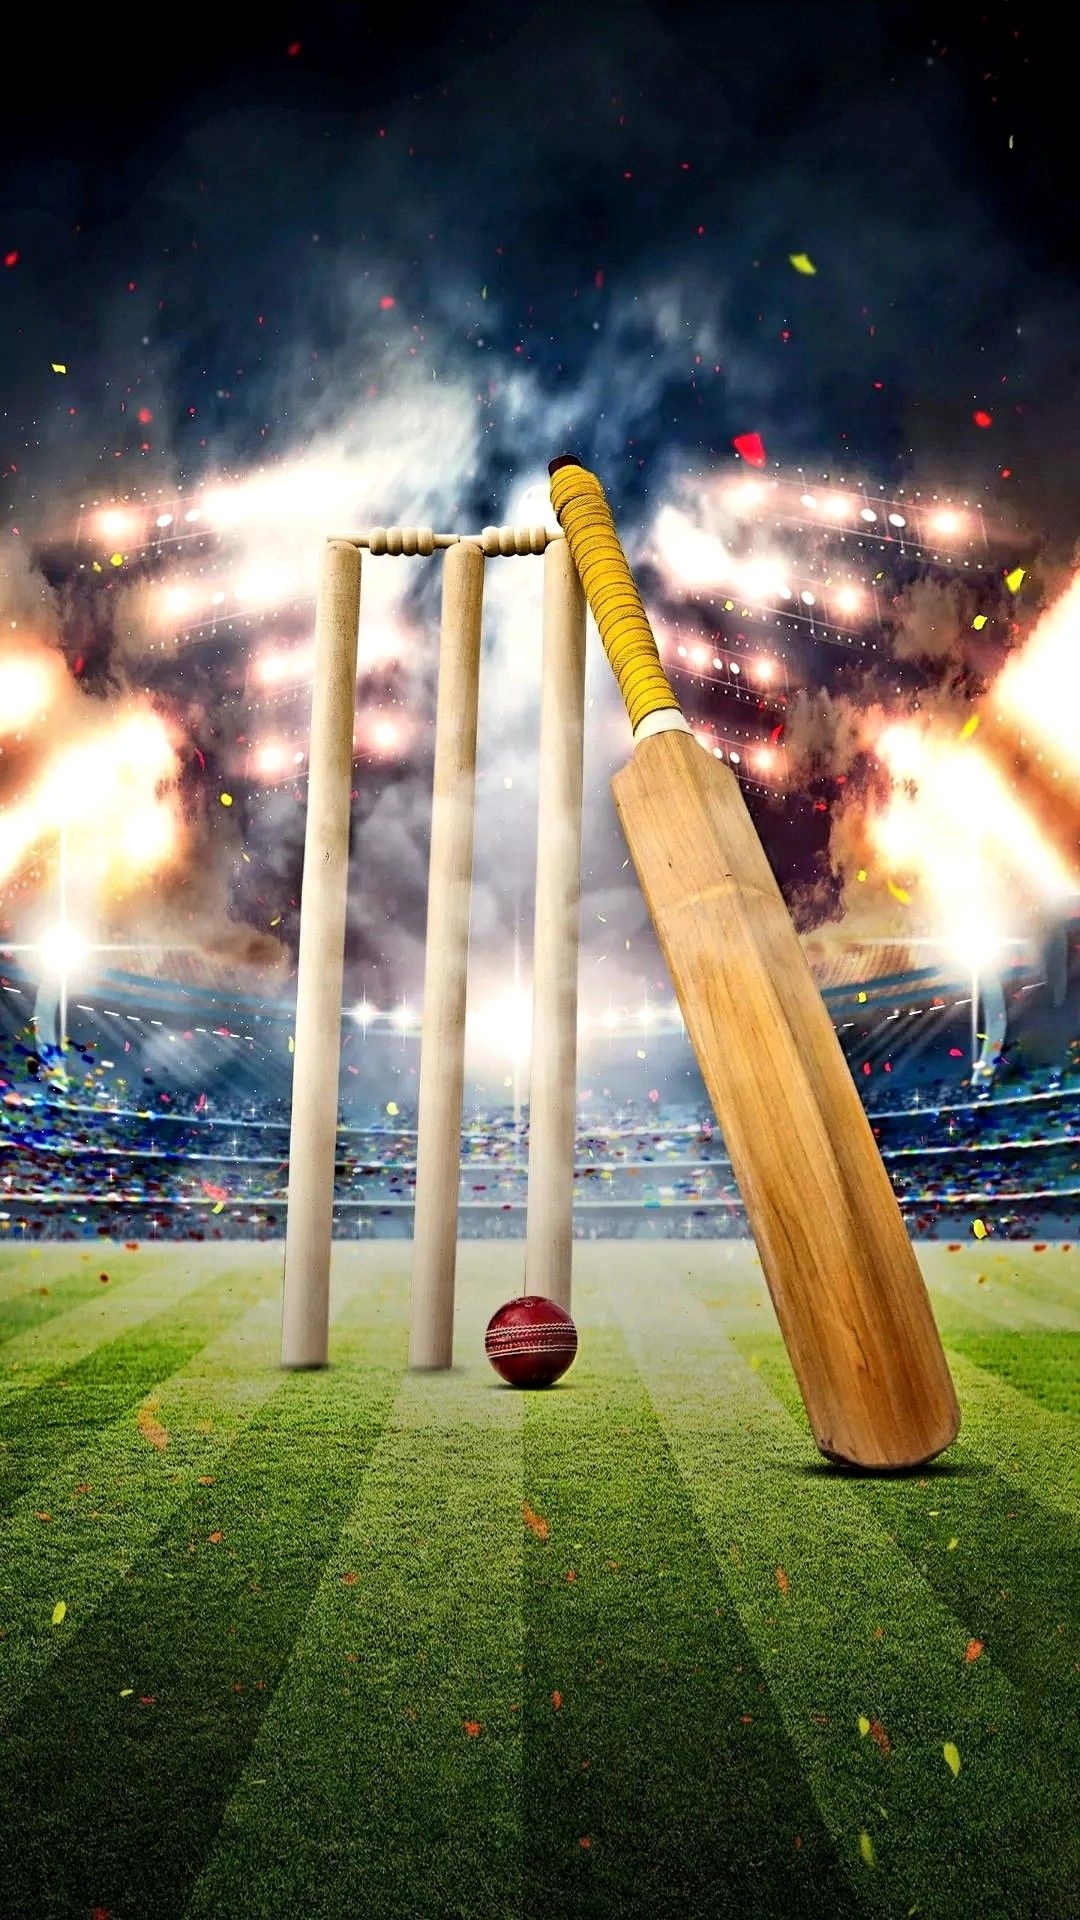 Cricket: Modern sports equipment for a bat-and-ball game, Cricket bat, Cricket ball. 1080x1920 Full HD Background.